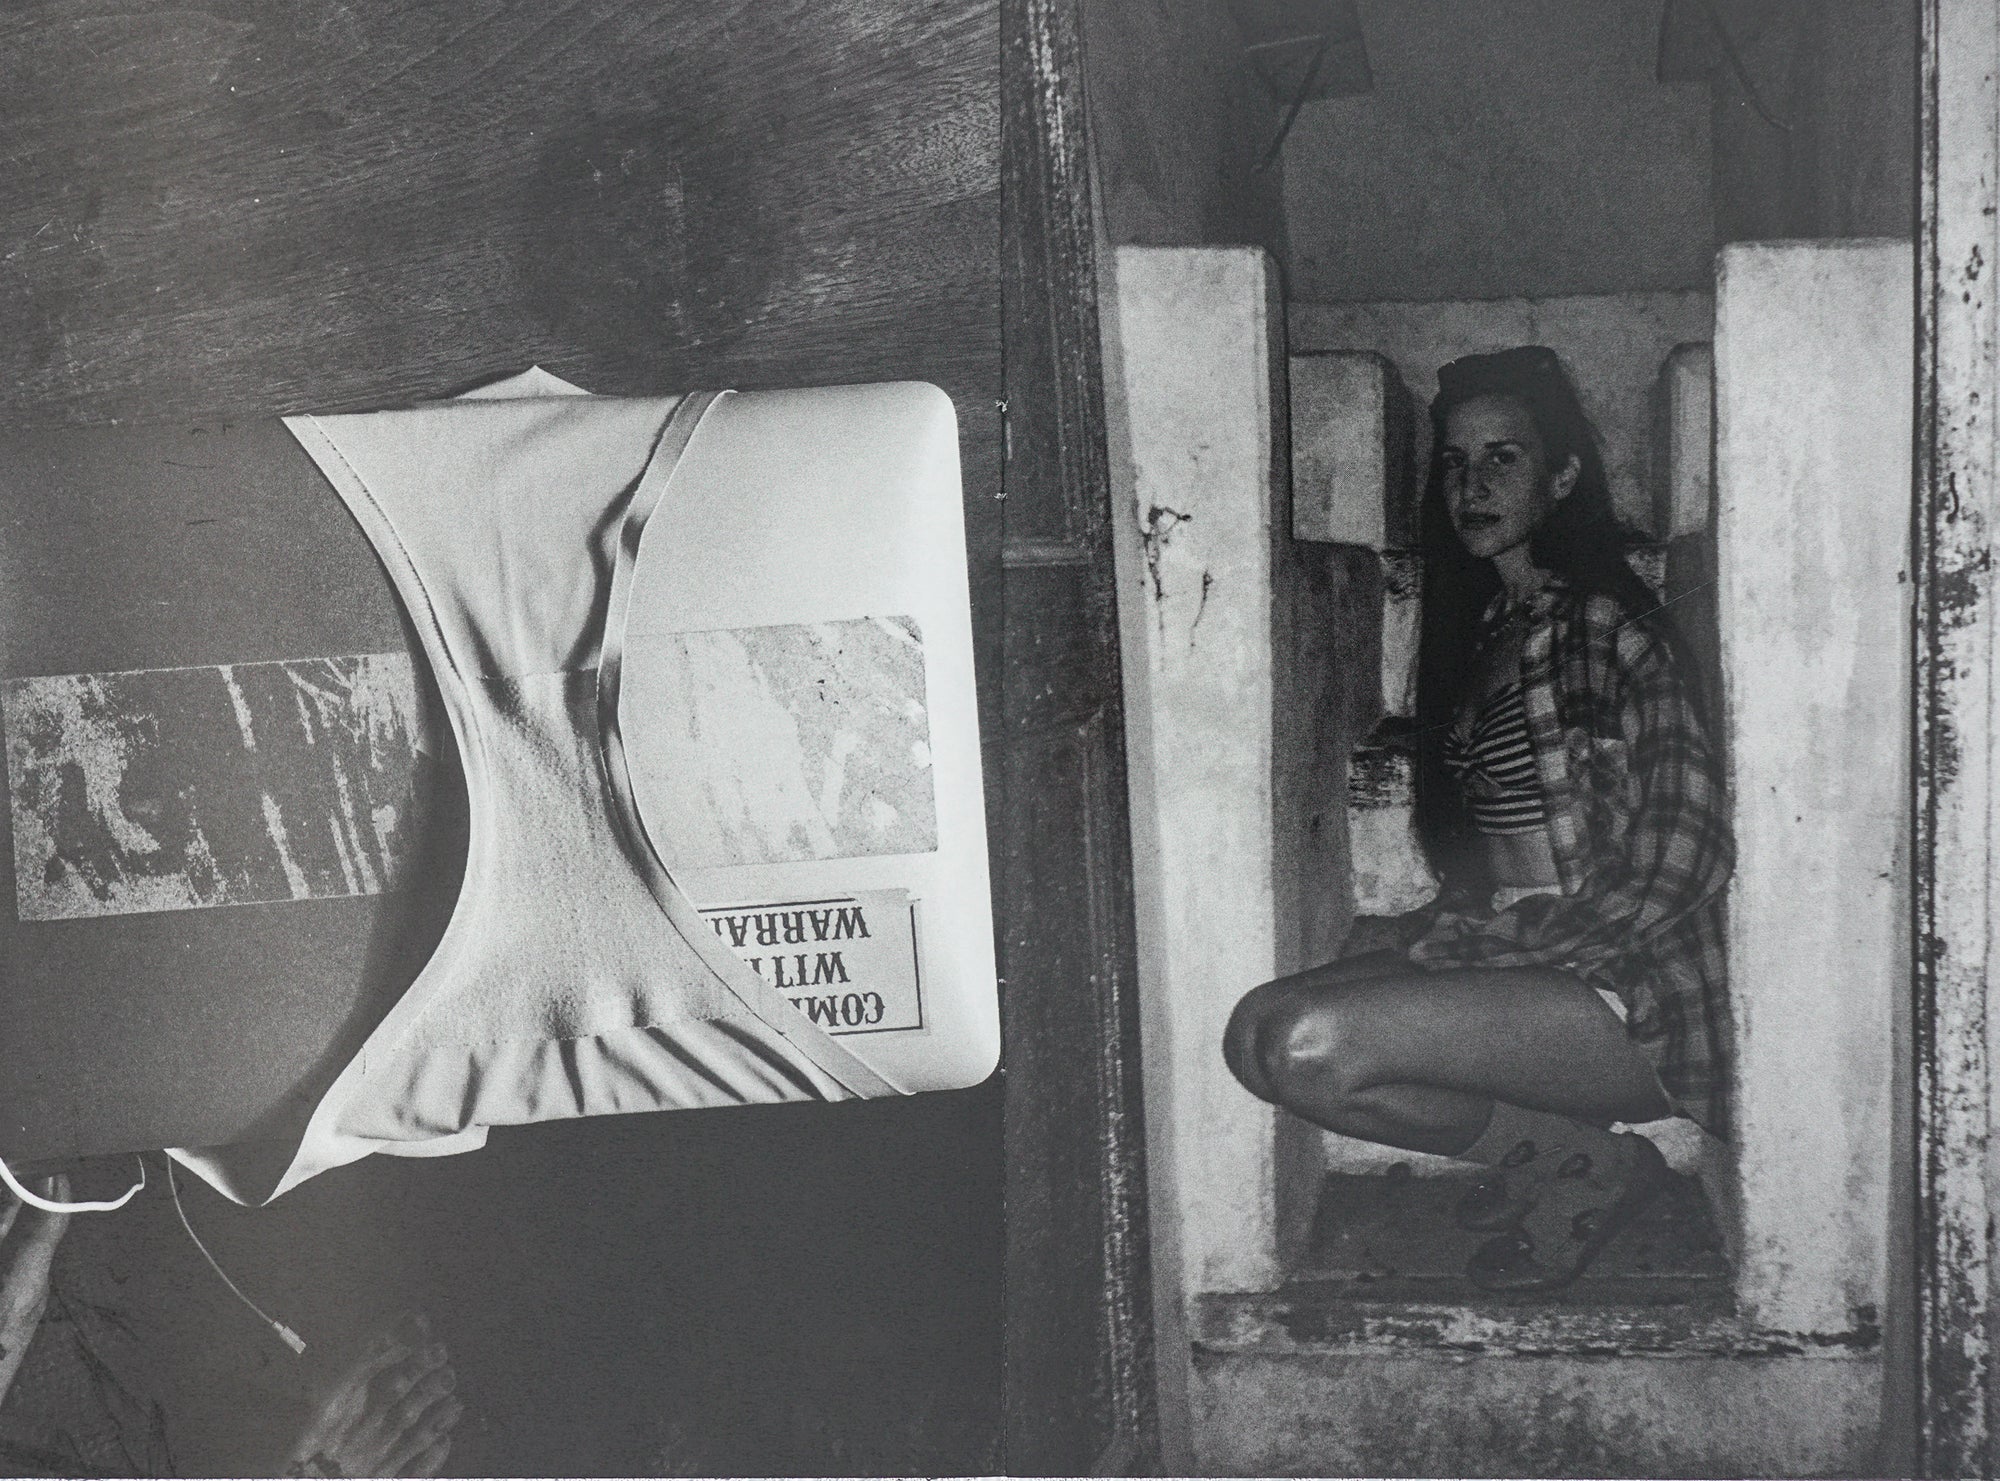 Spread of the book in black and white, a photograph of a person with long hair sitting in a derelict structure, and on the right a pair of underwear around the door of a freezer.